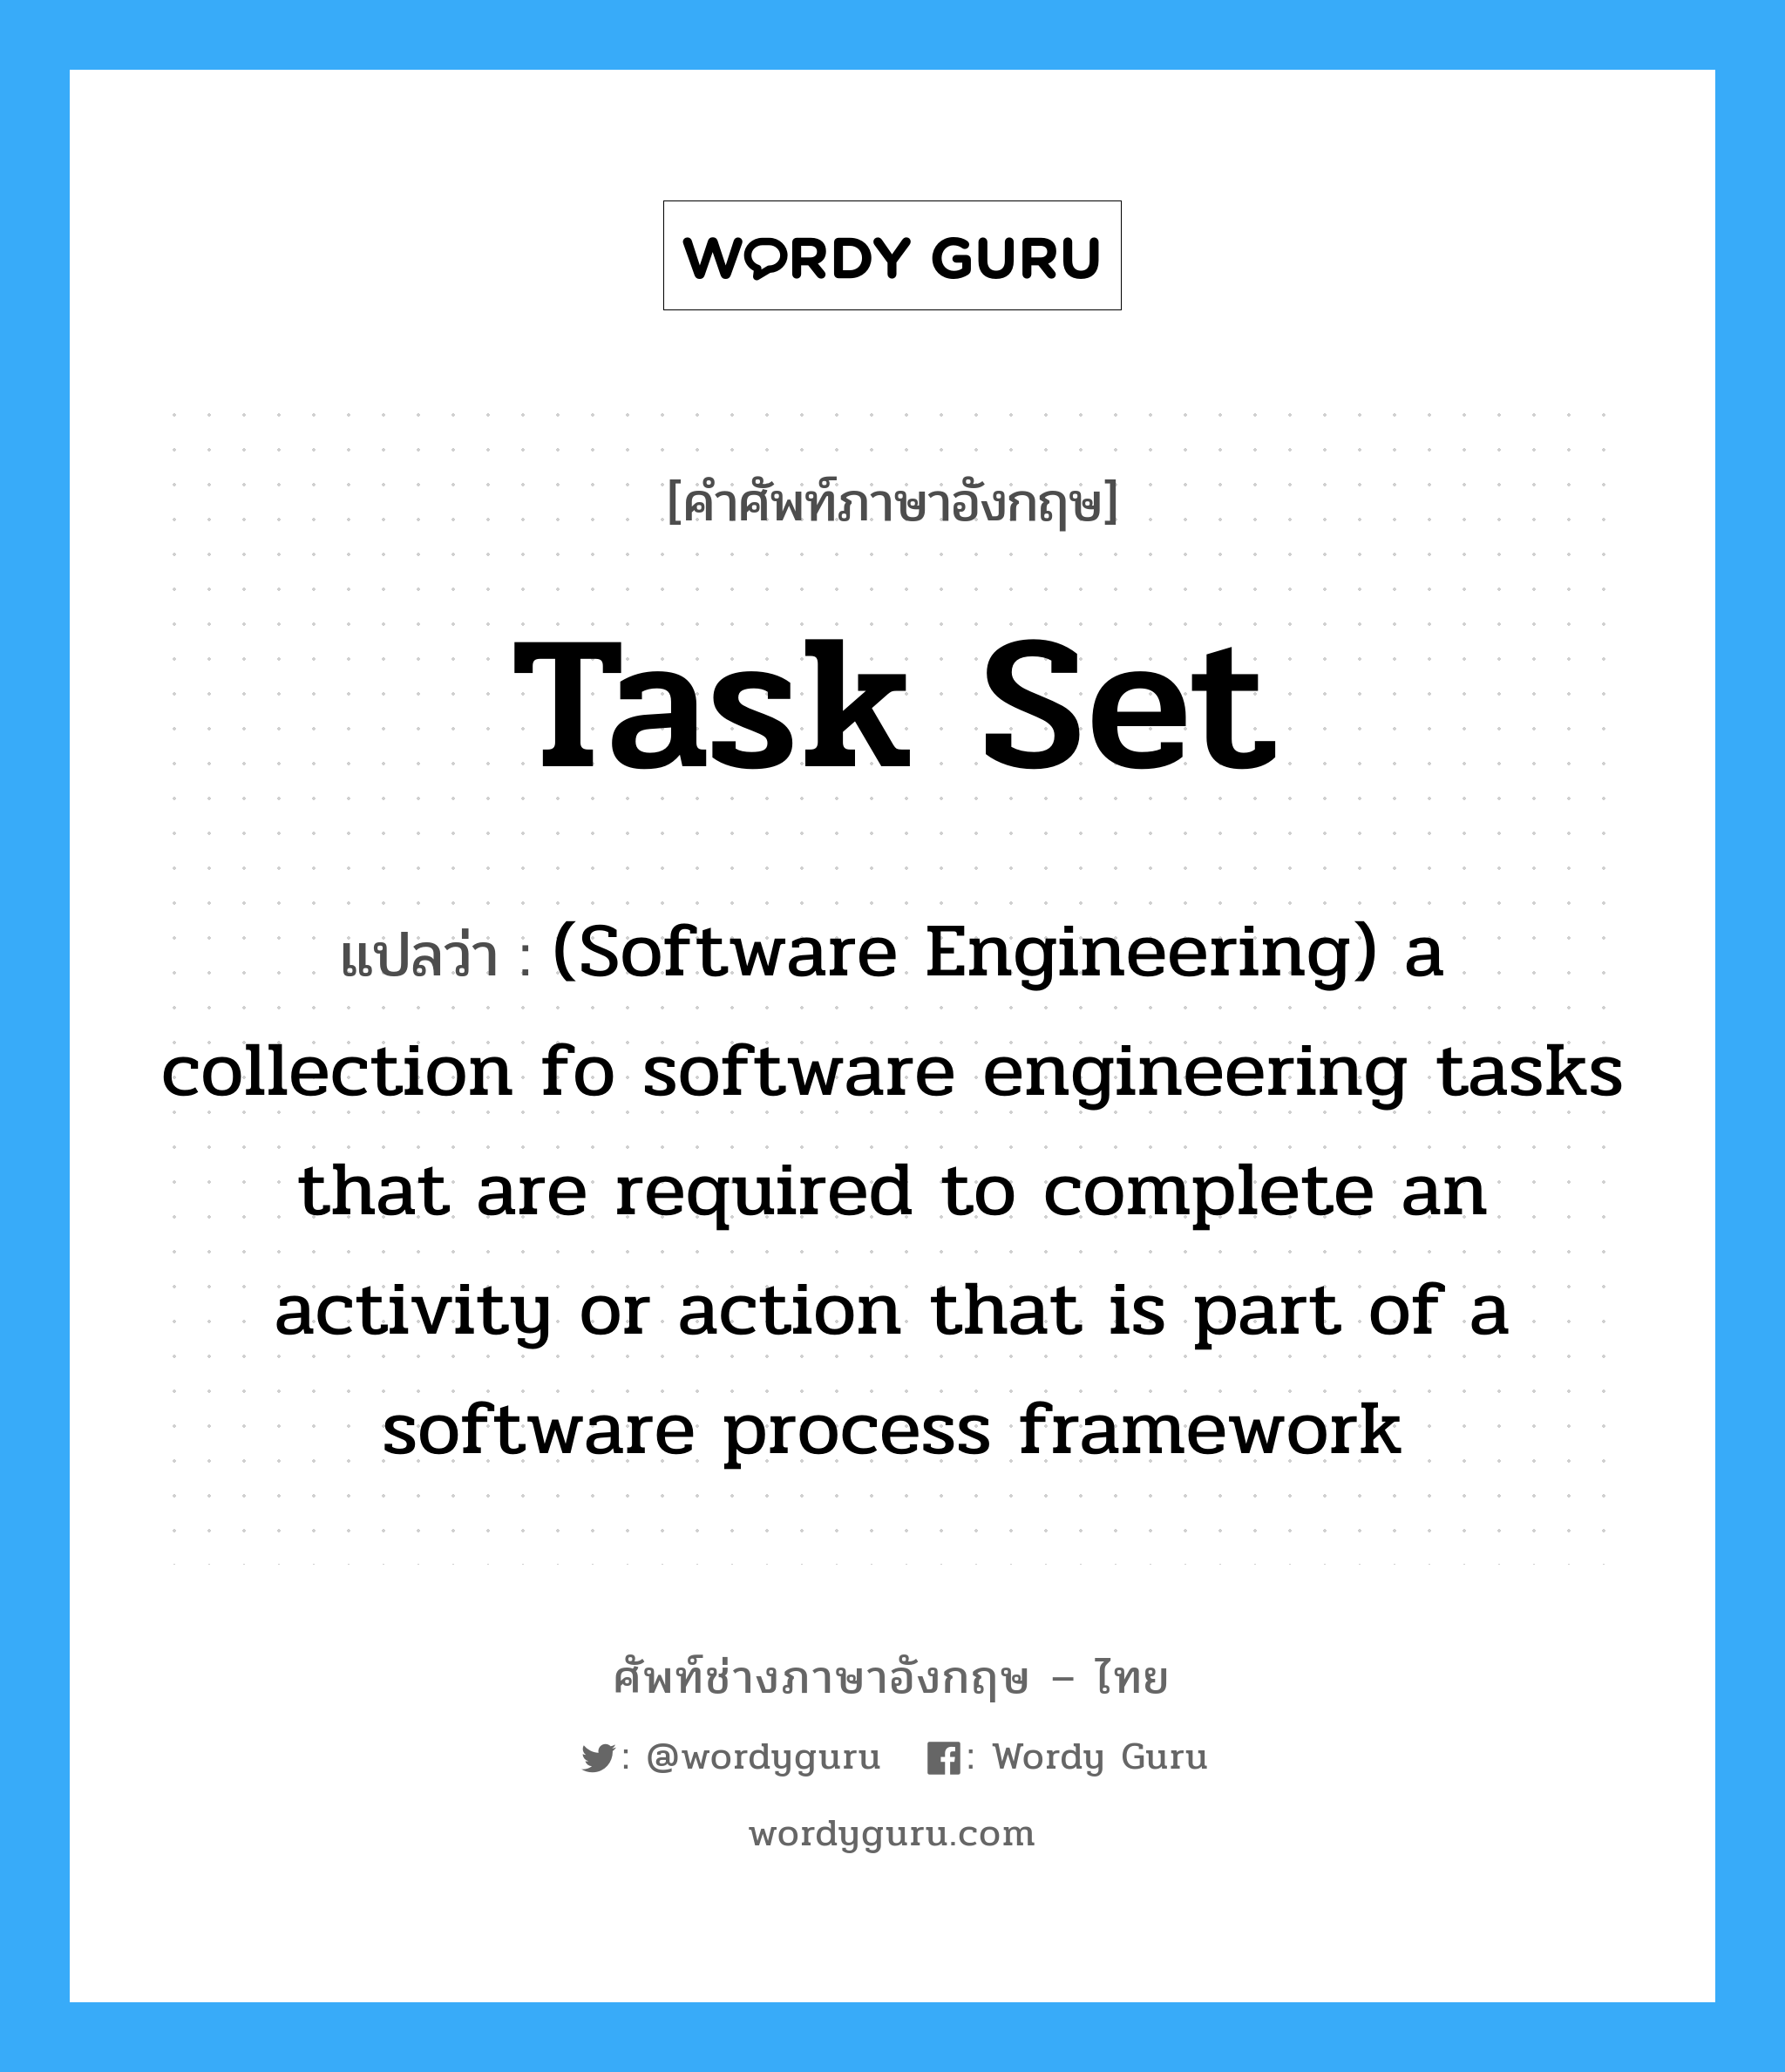 Task set แปลว่า?, คำศัพท์ช่างภาษาอังกฤษ - ไทย Task set คำศัพท์ภาษาอังกฤษ Task set แปลว่า (Software Engineering) a collection fo software engineering tasks that are required to complete an activity or action that is part of a software process framework